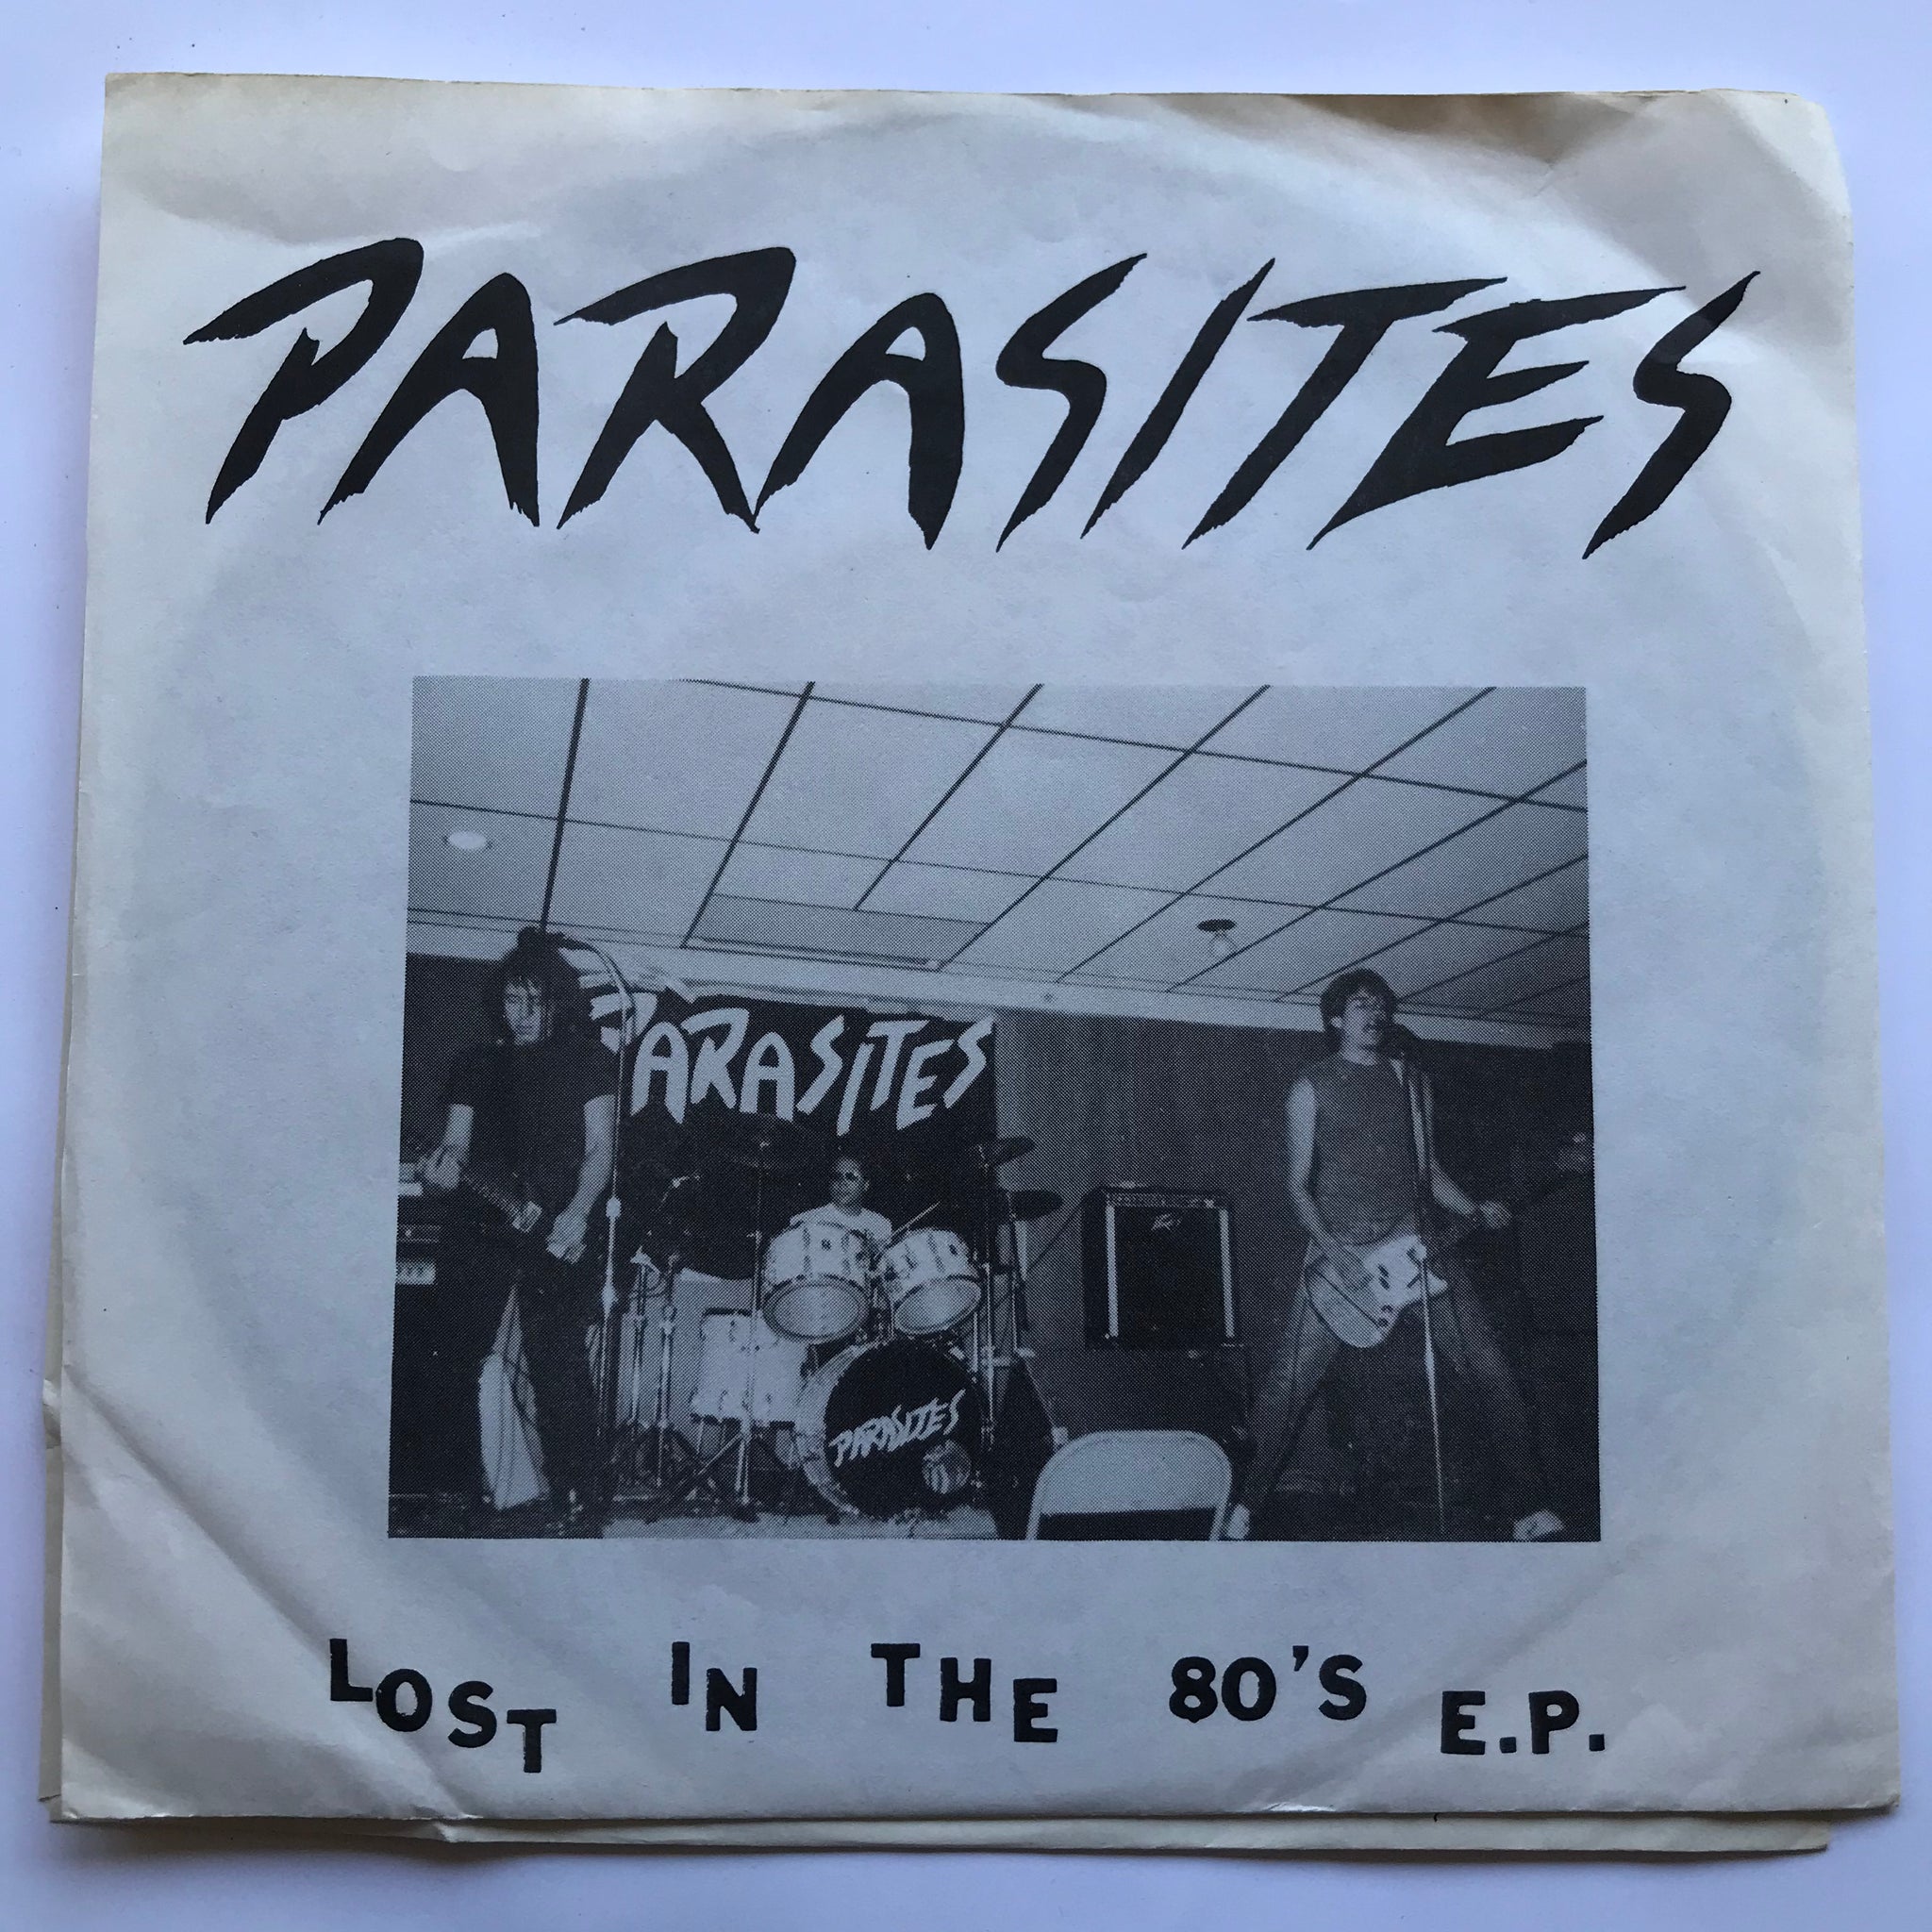 Parasites - Lost in the 80's E.P.